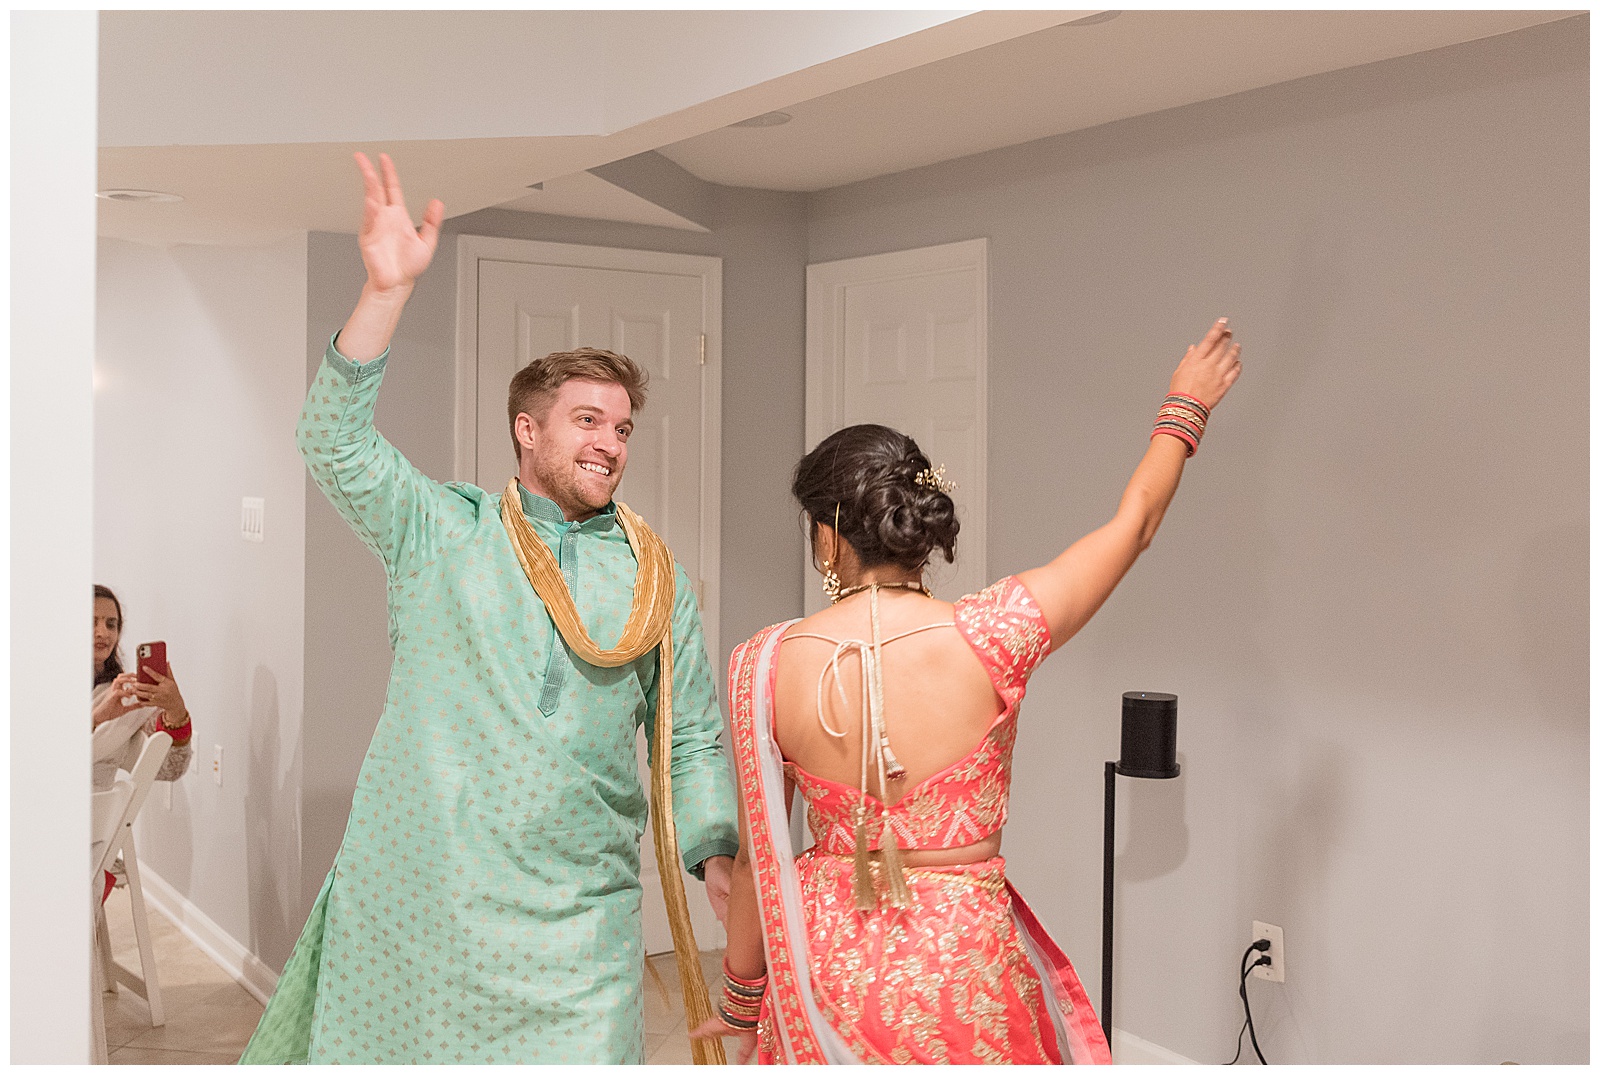 traditional indian wedding dance with groom in light green outfit and bride in dark pink dress in ellicott city maryland